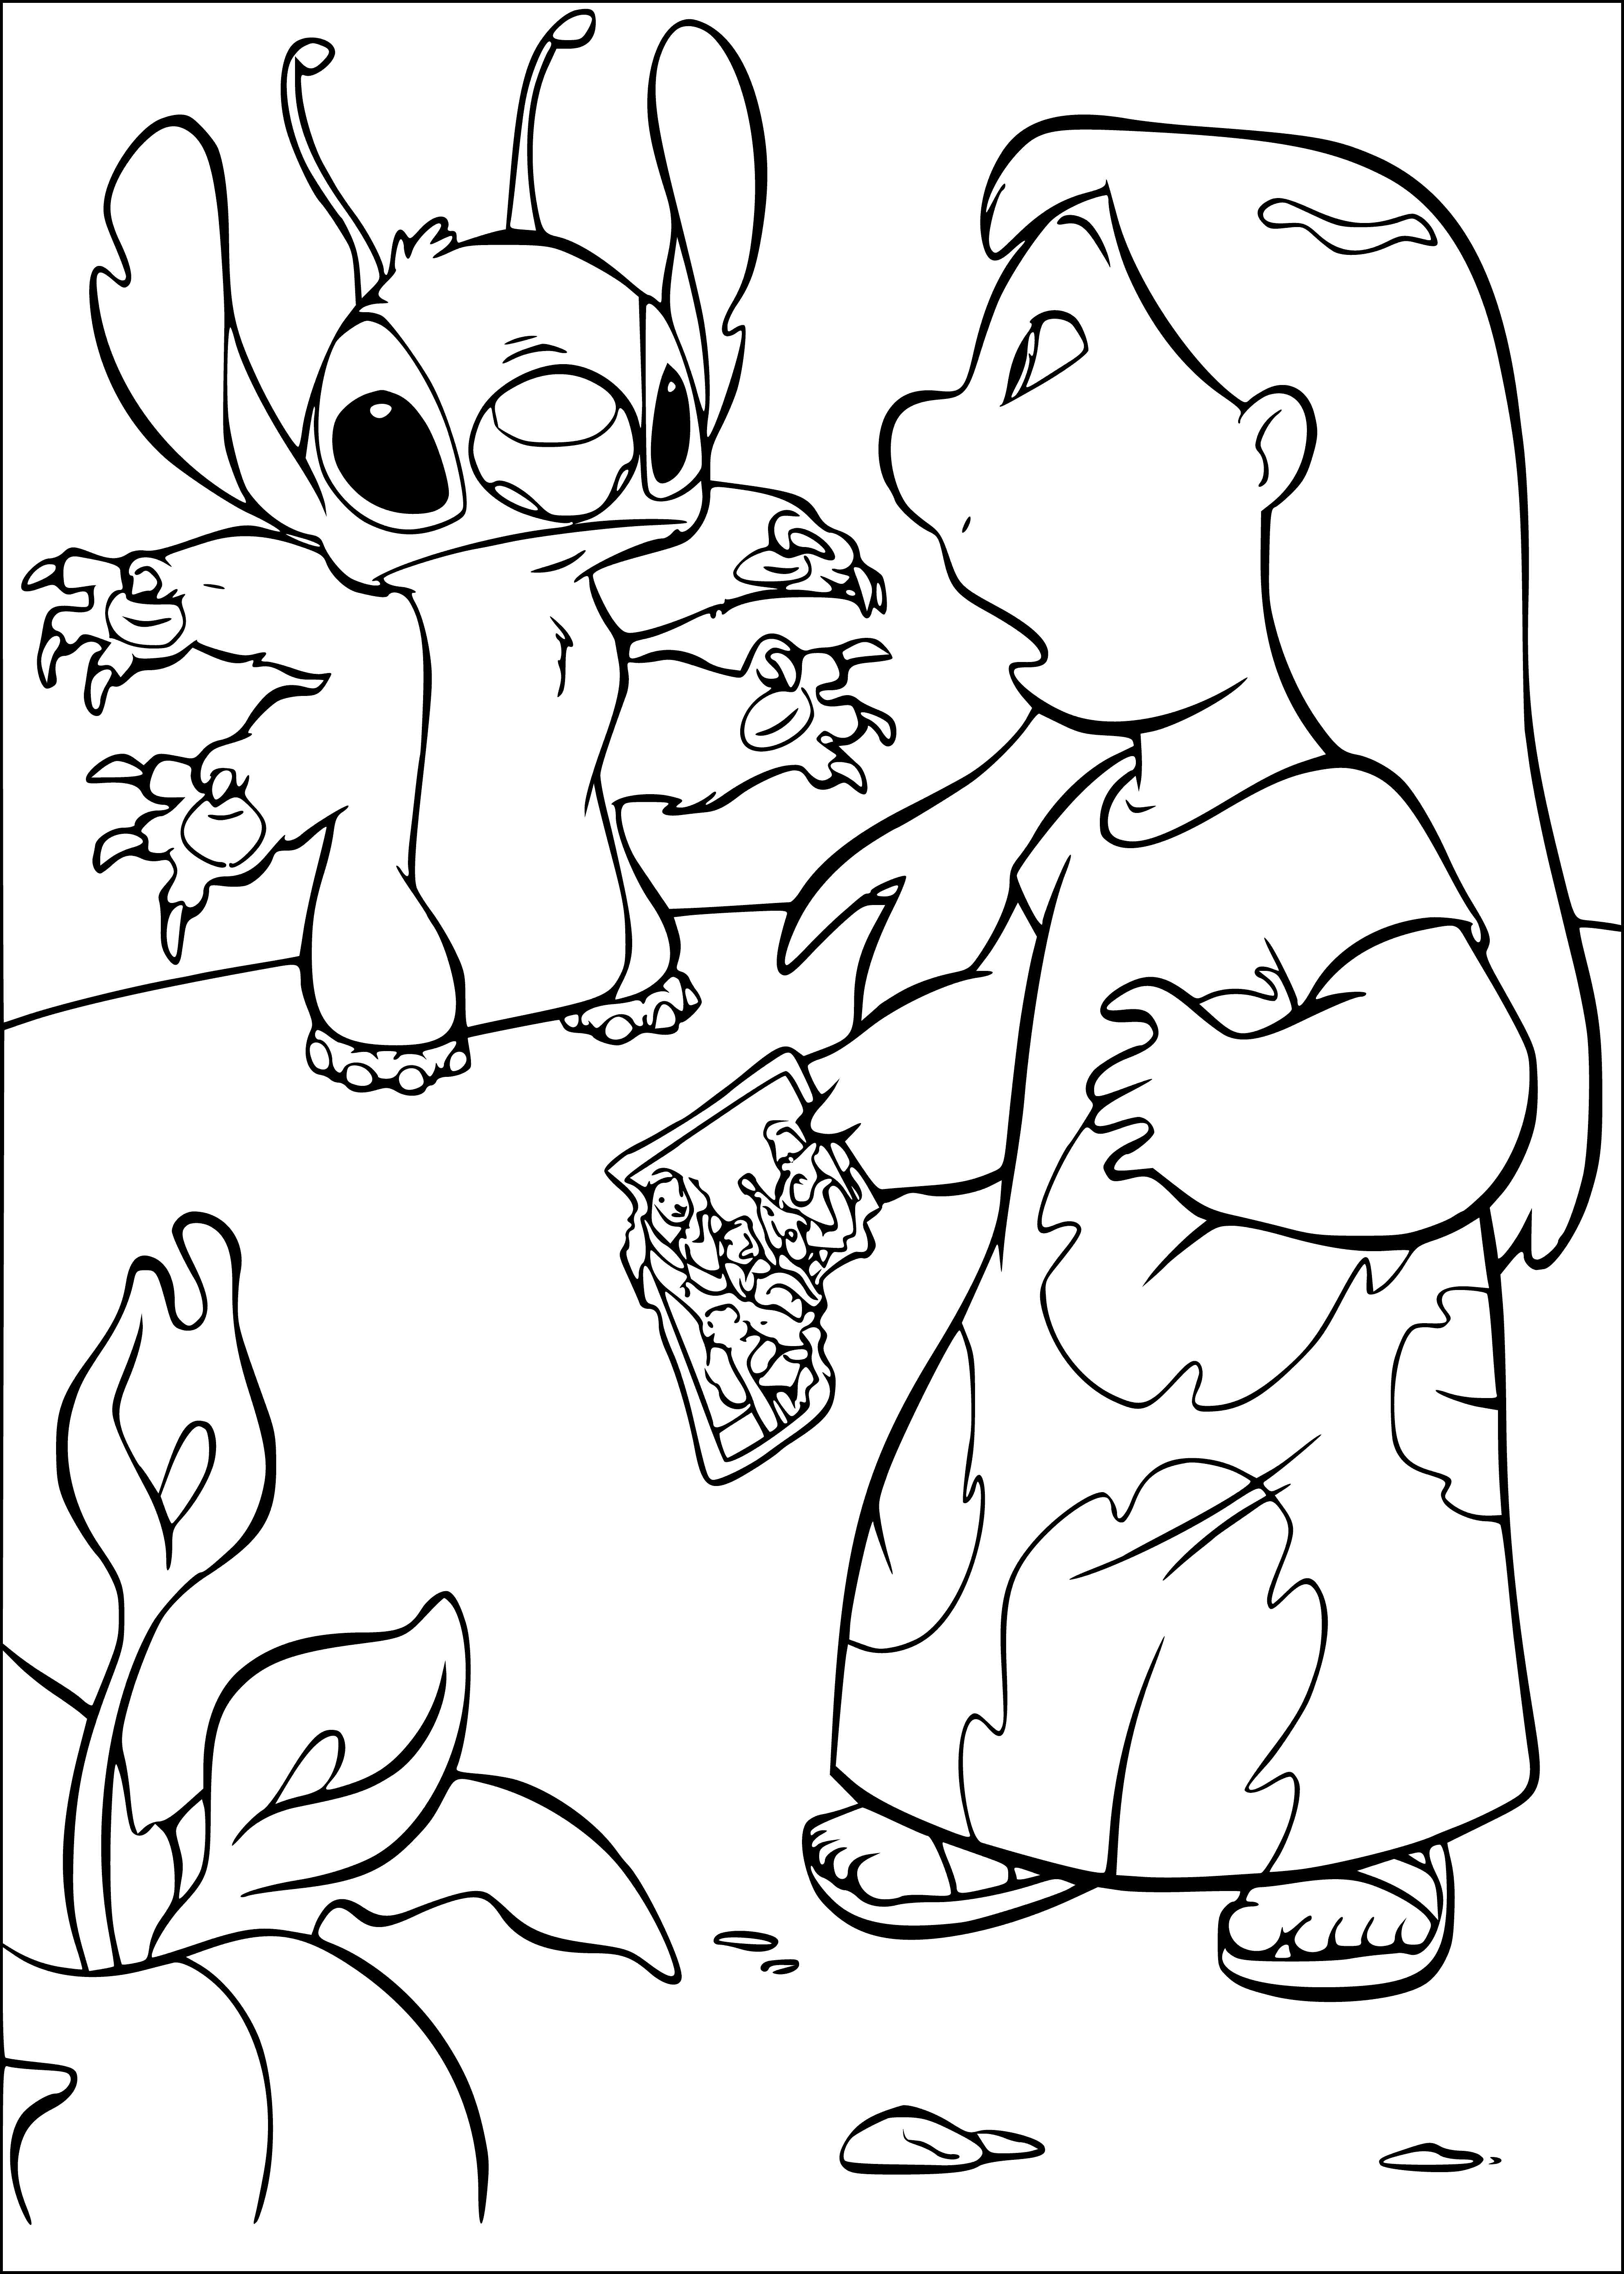 Stitch is alien coloring page